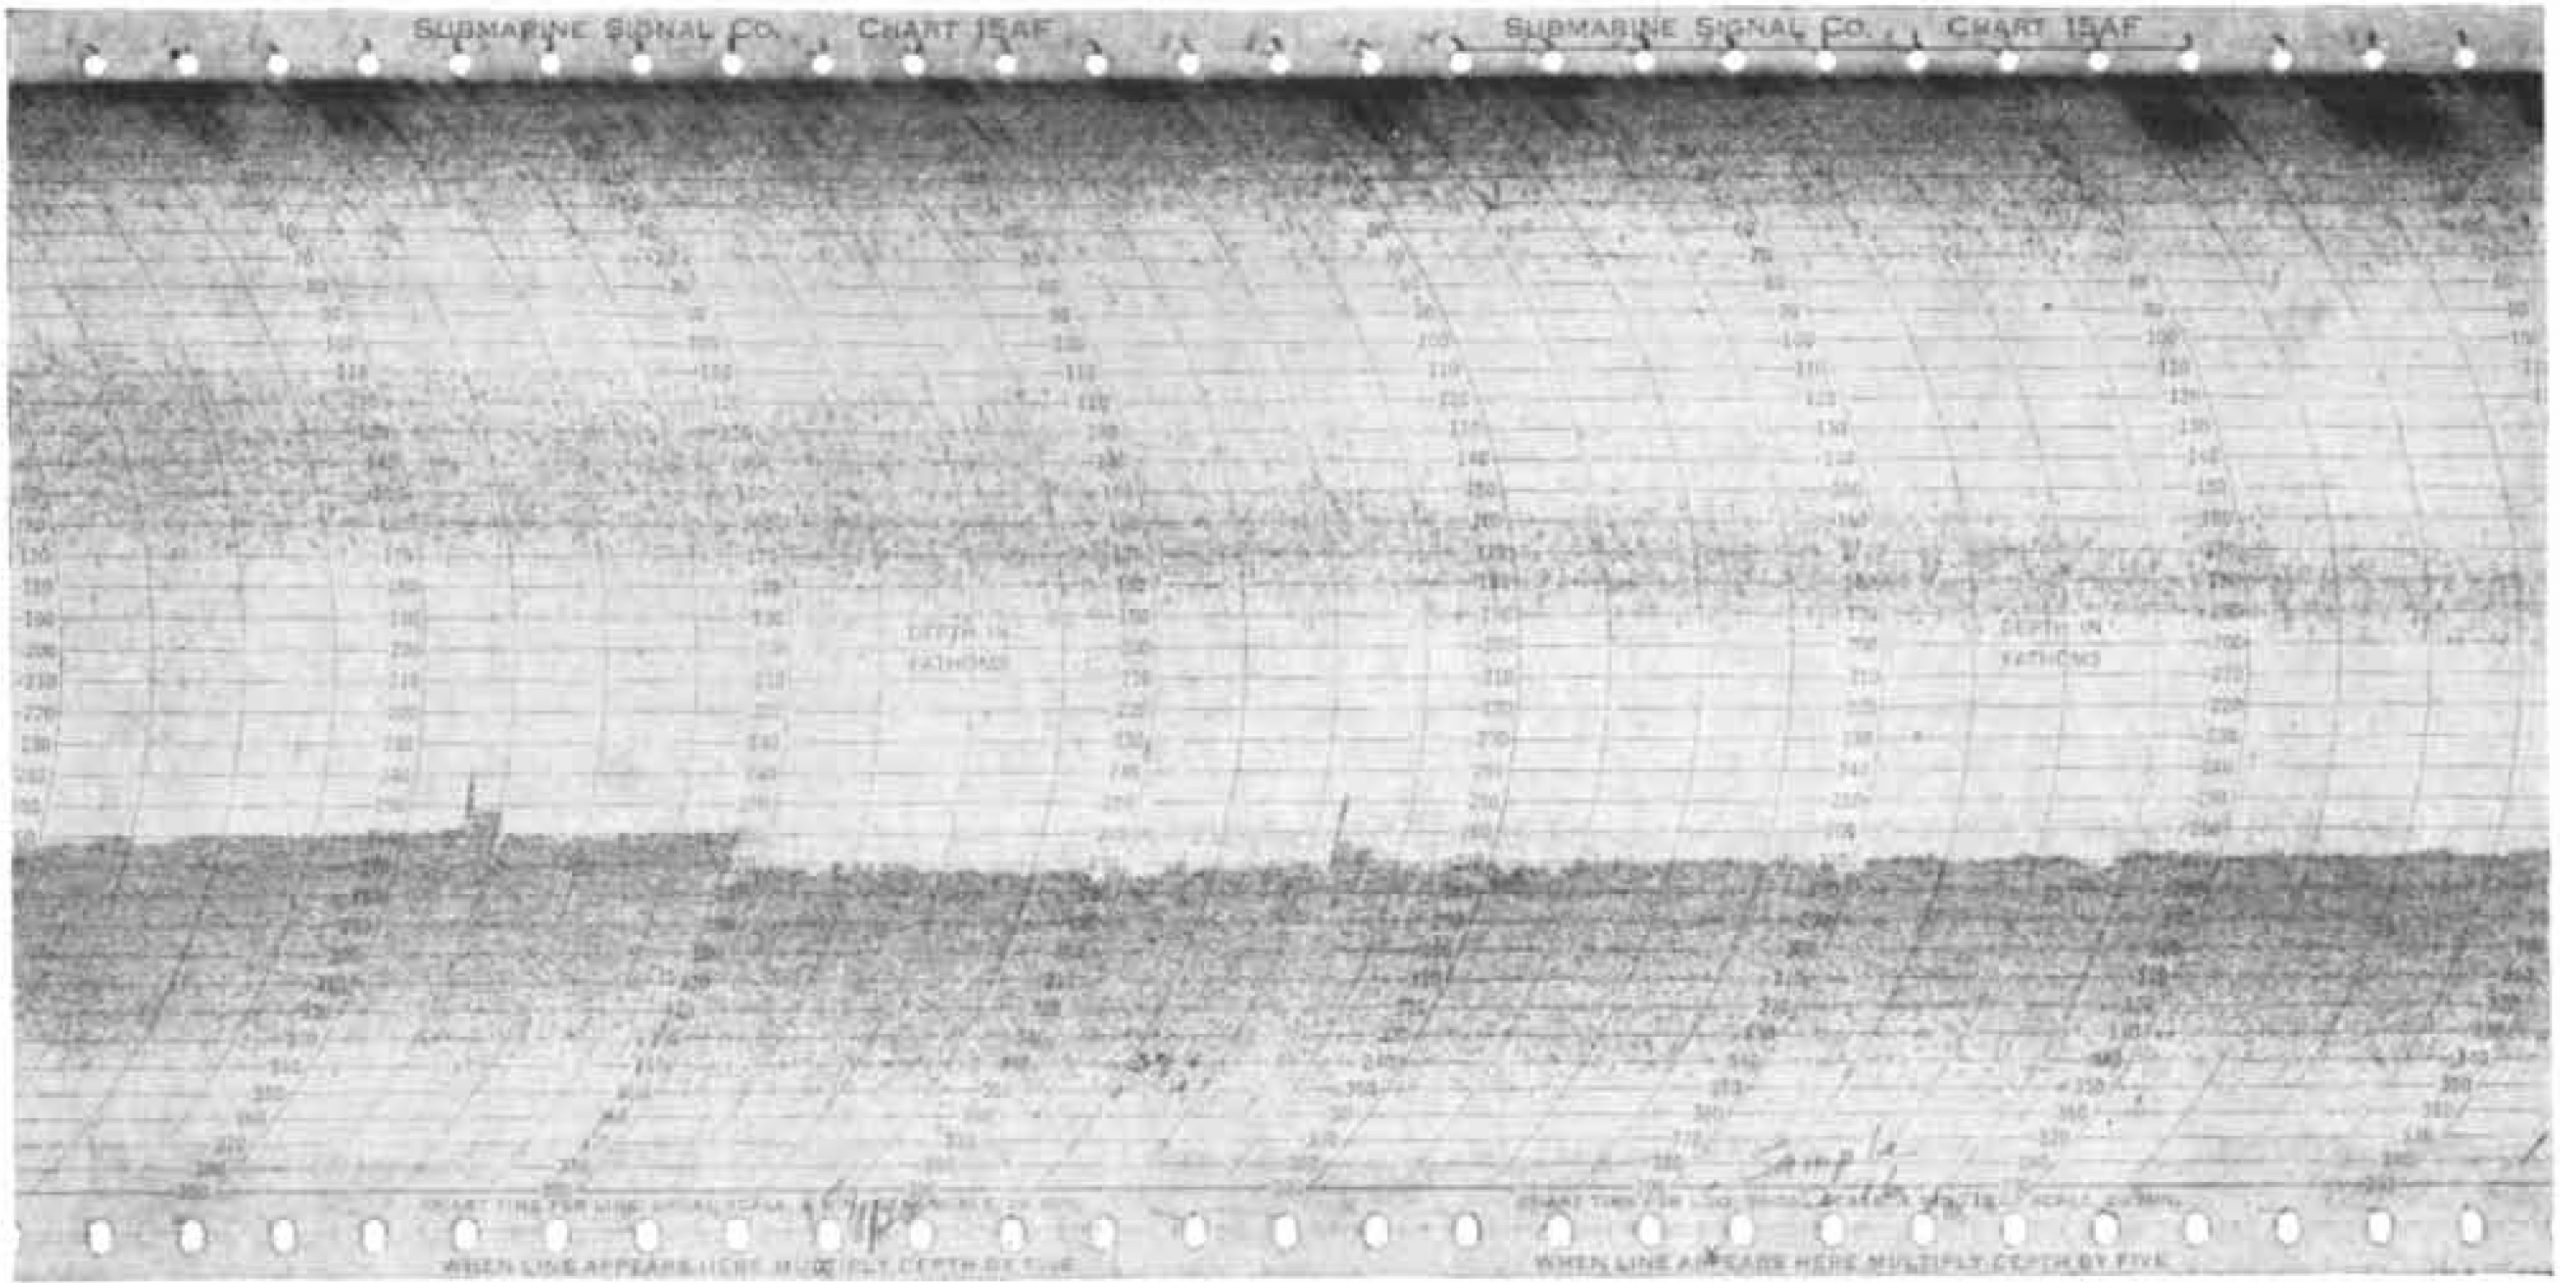 This echo-sounder recording from the 1950s shows the Deep Scattering layer as a faint trace running across the middle of the image. The stronger trace below it is the seafloor. 